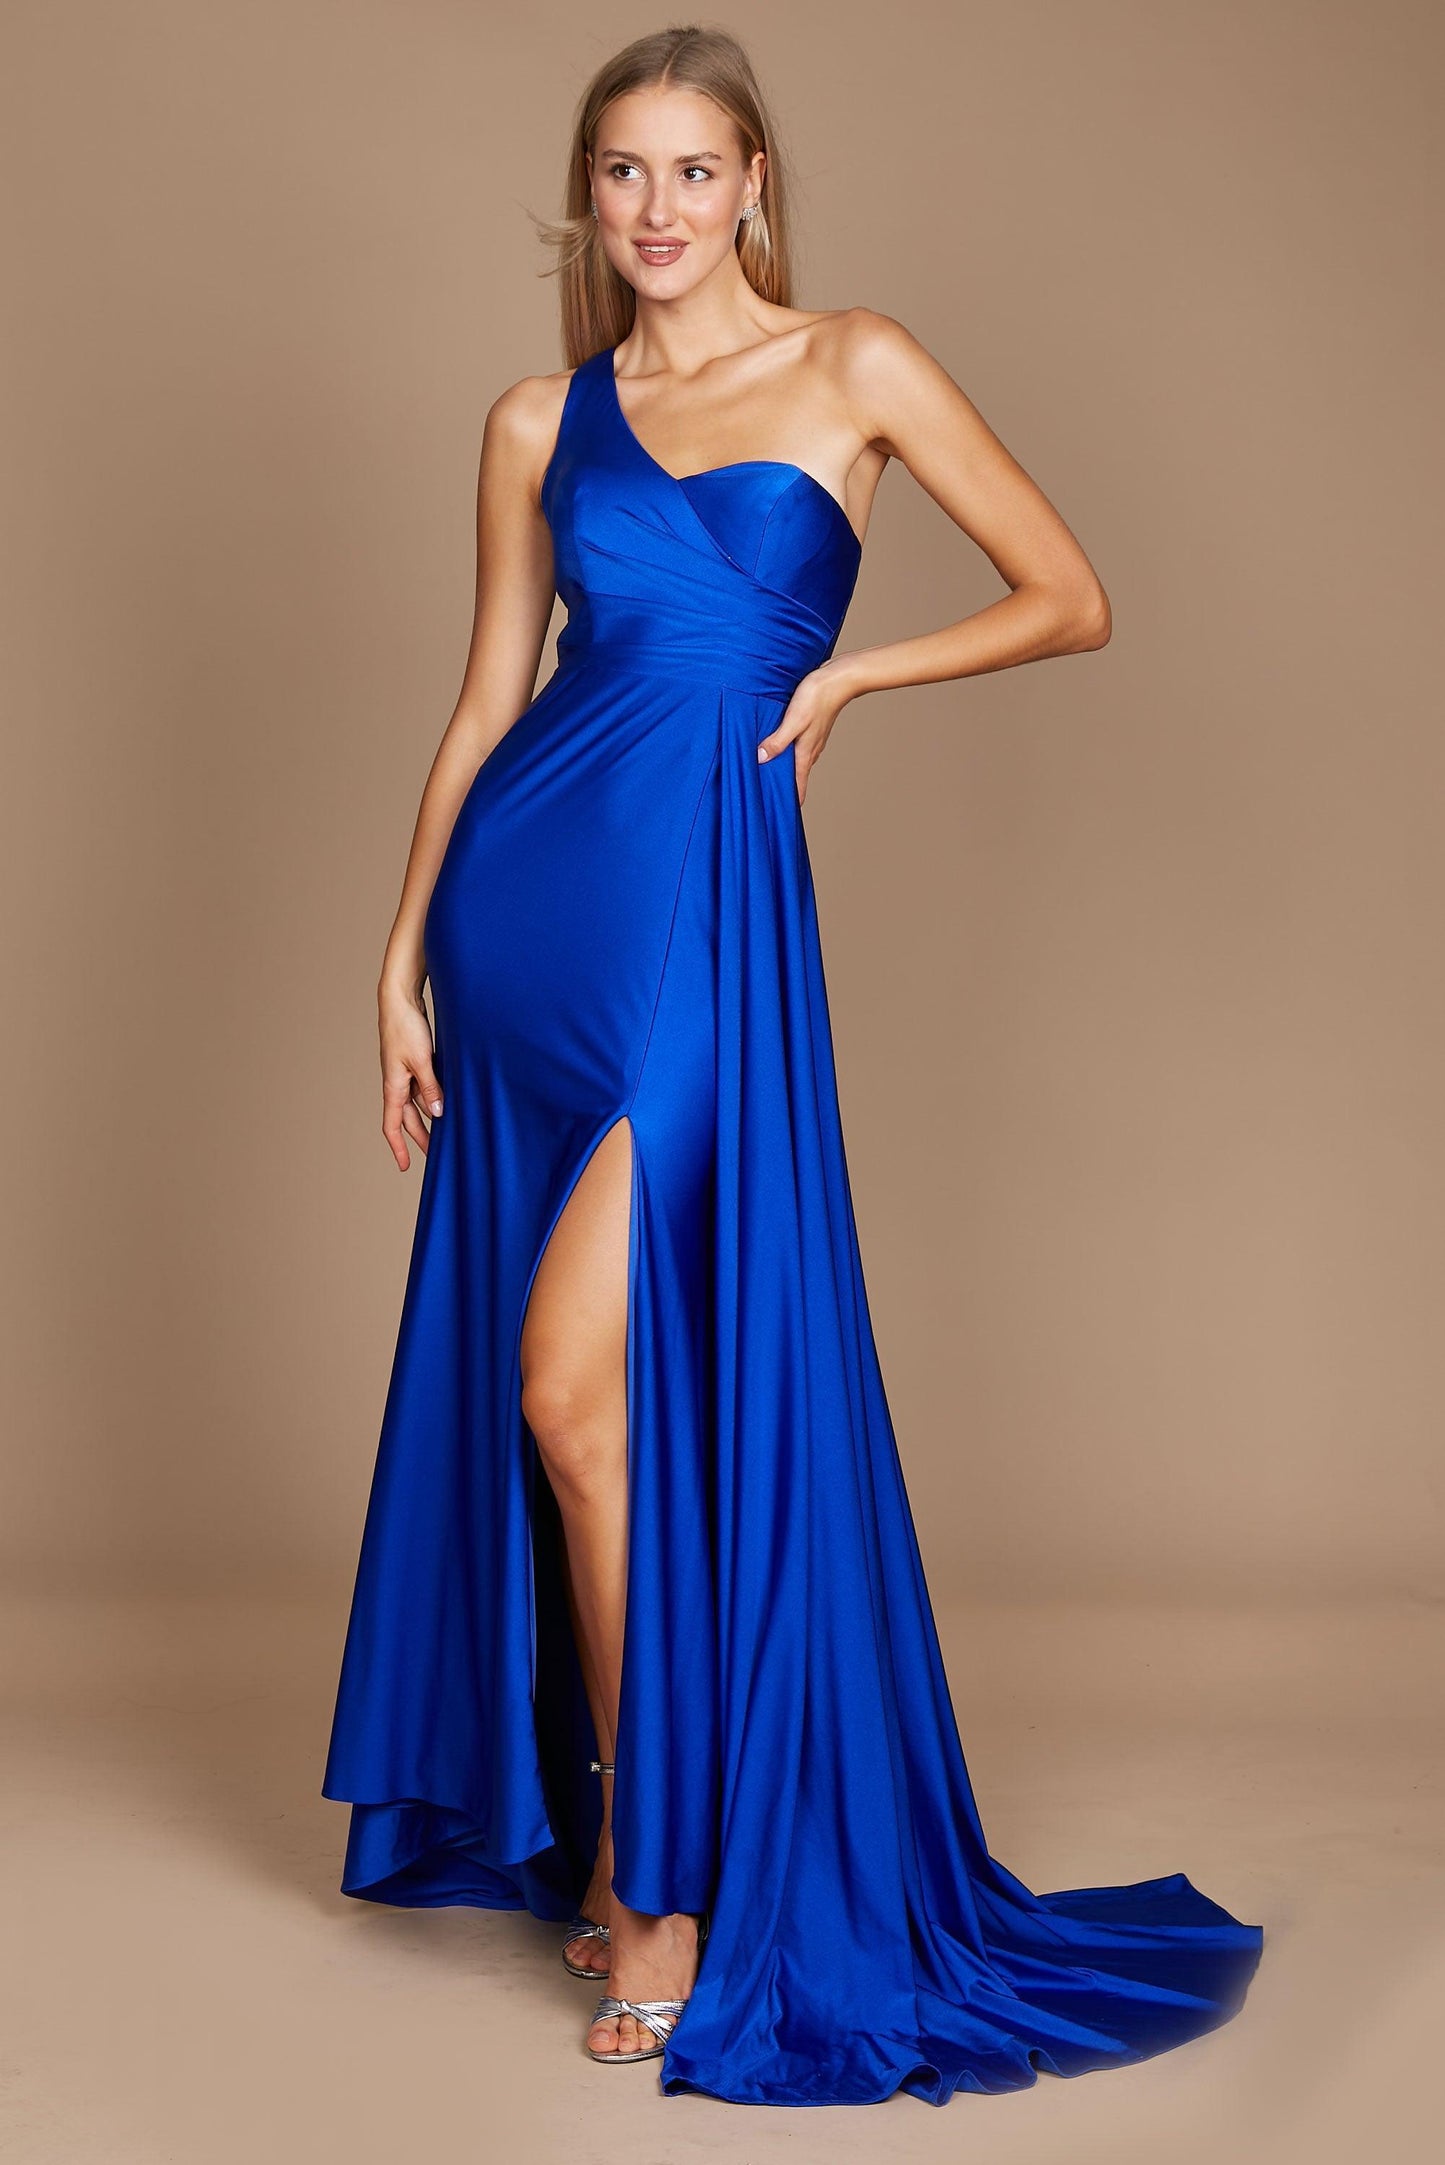 Prom Dresses One Shoulder Long Evening Gown Prom Dress Royal